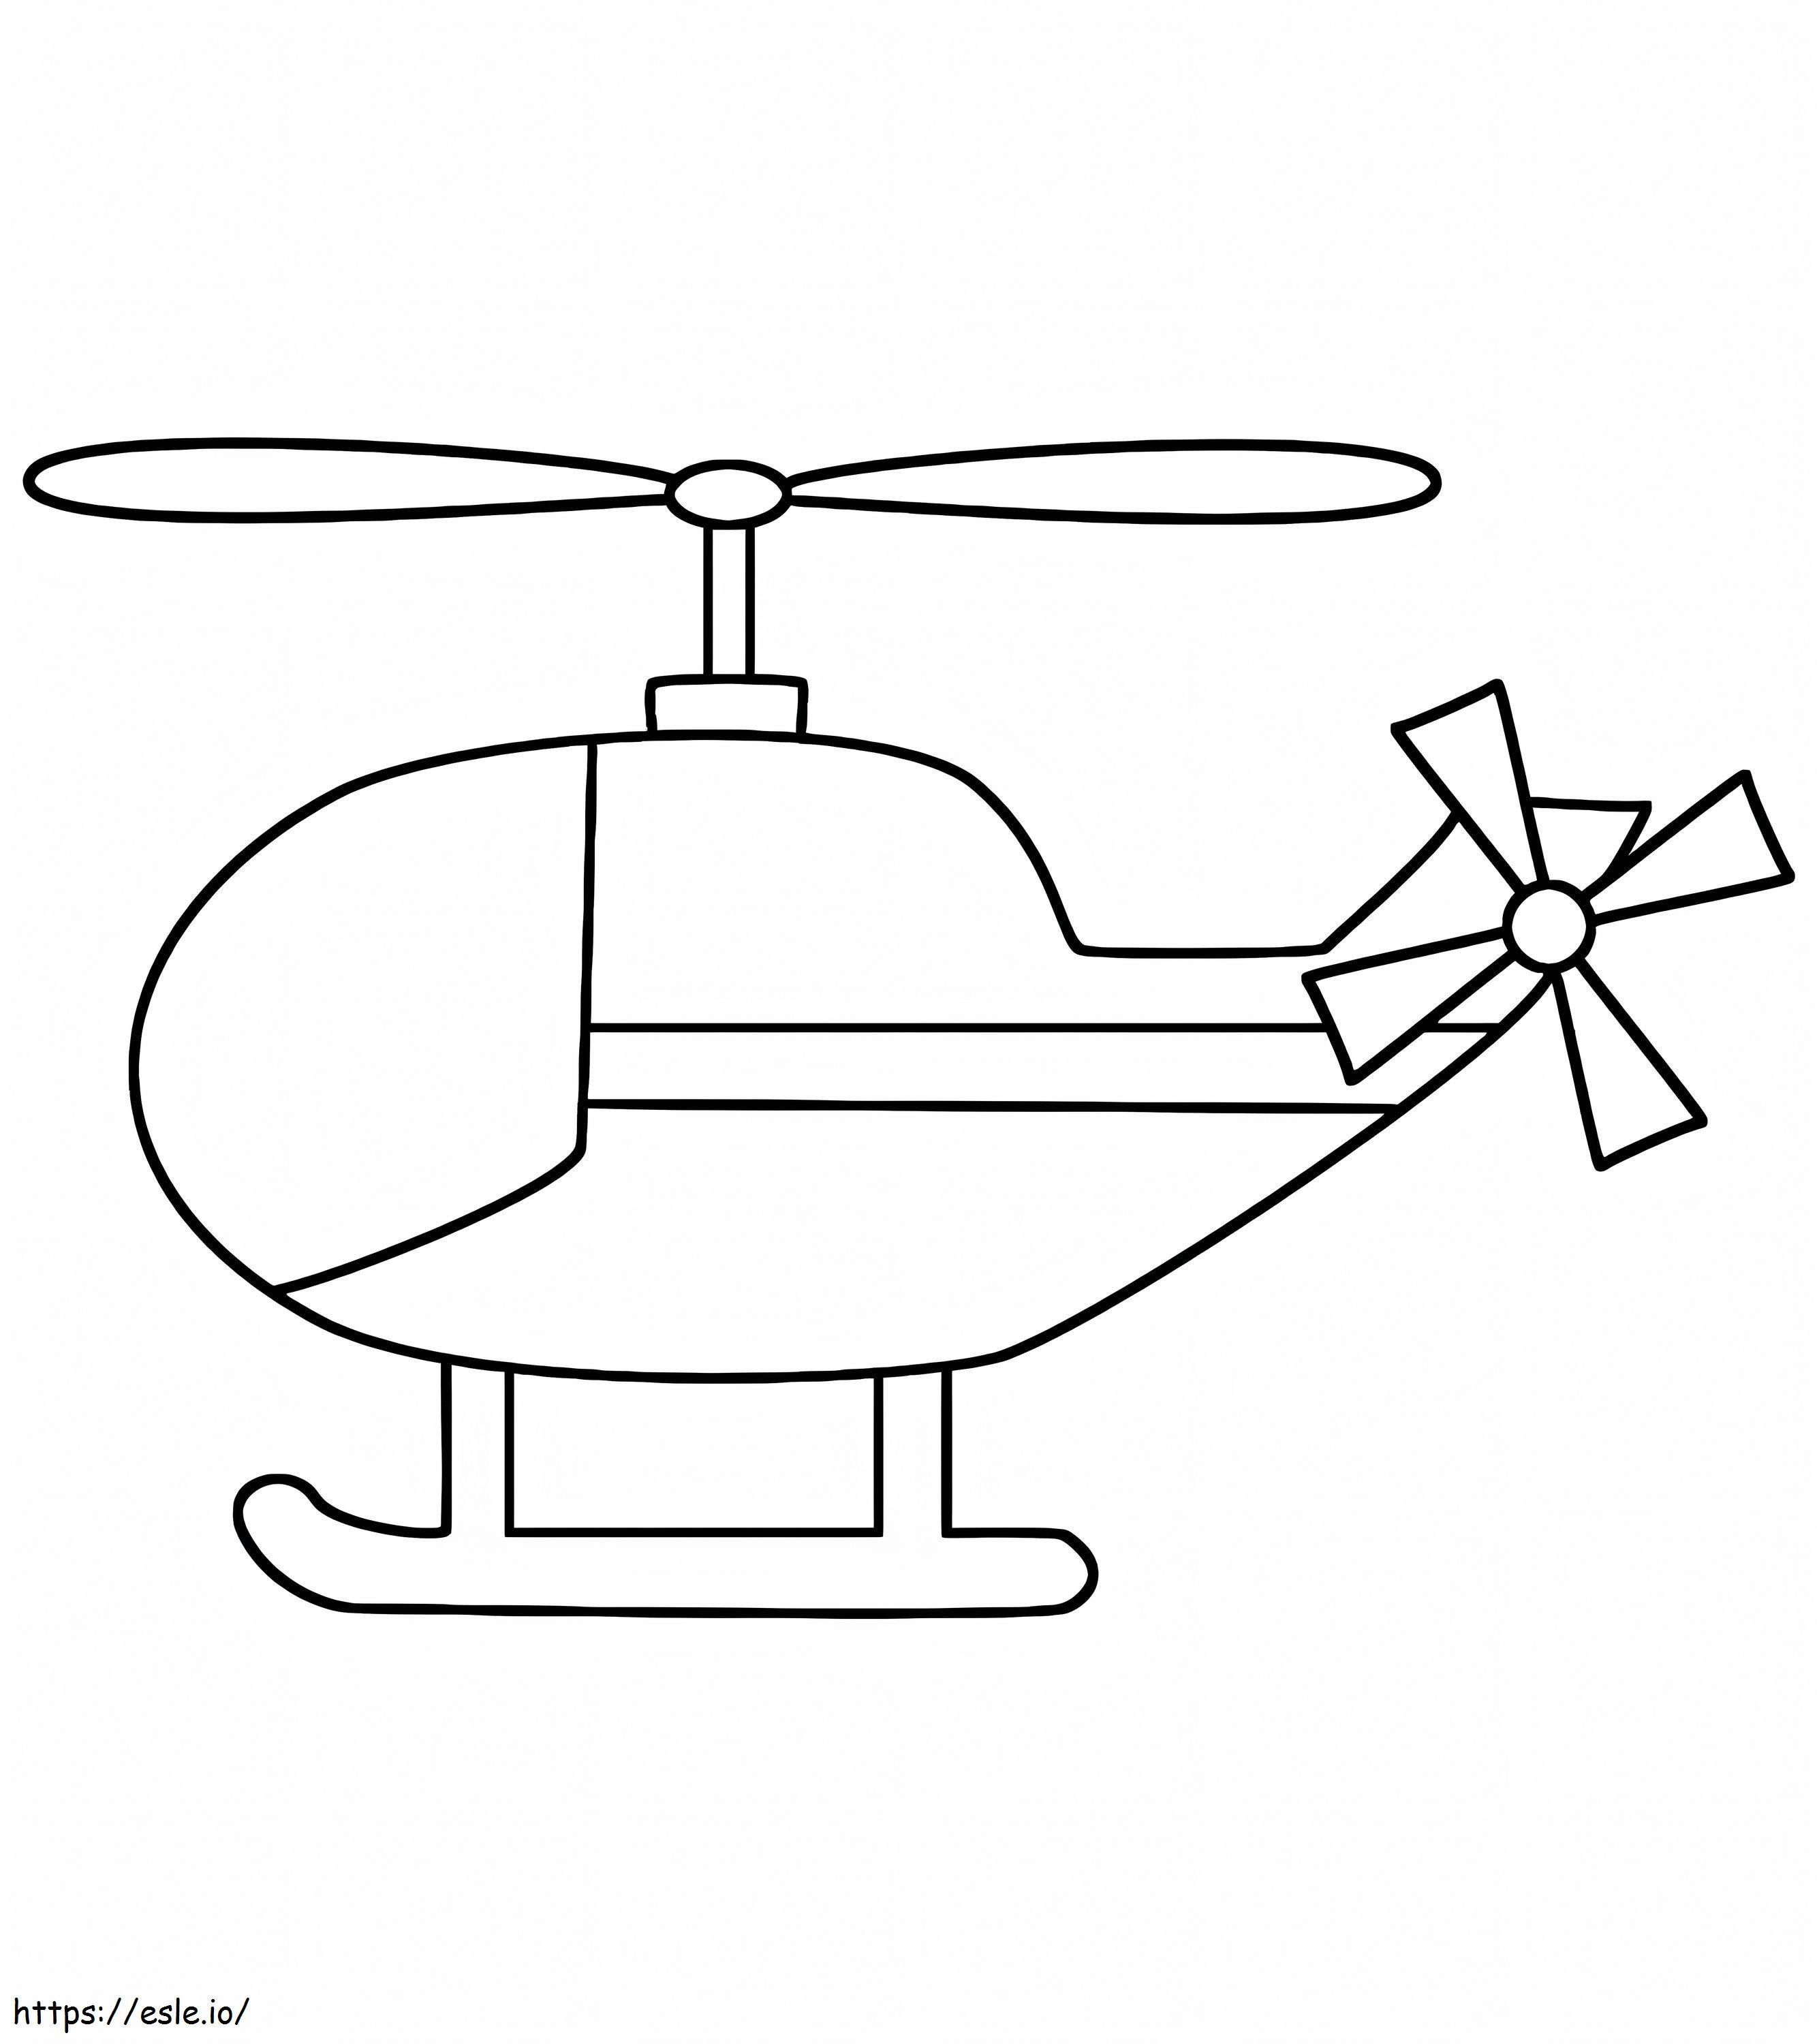 Helicopter Coloring Pages For Your Littl Ones coloring page